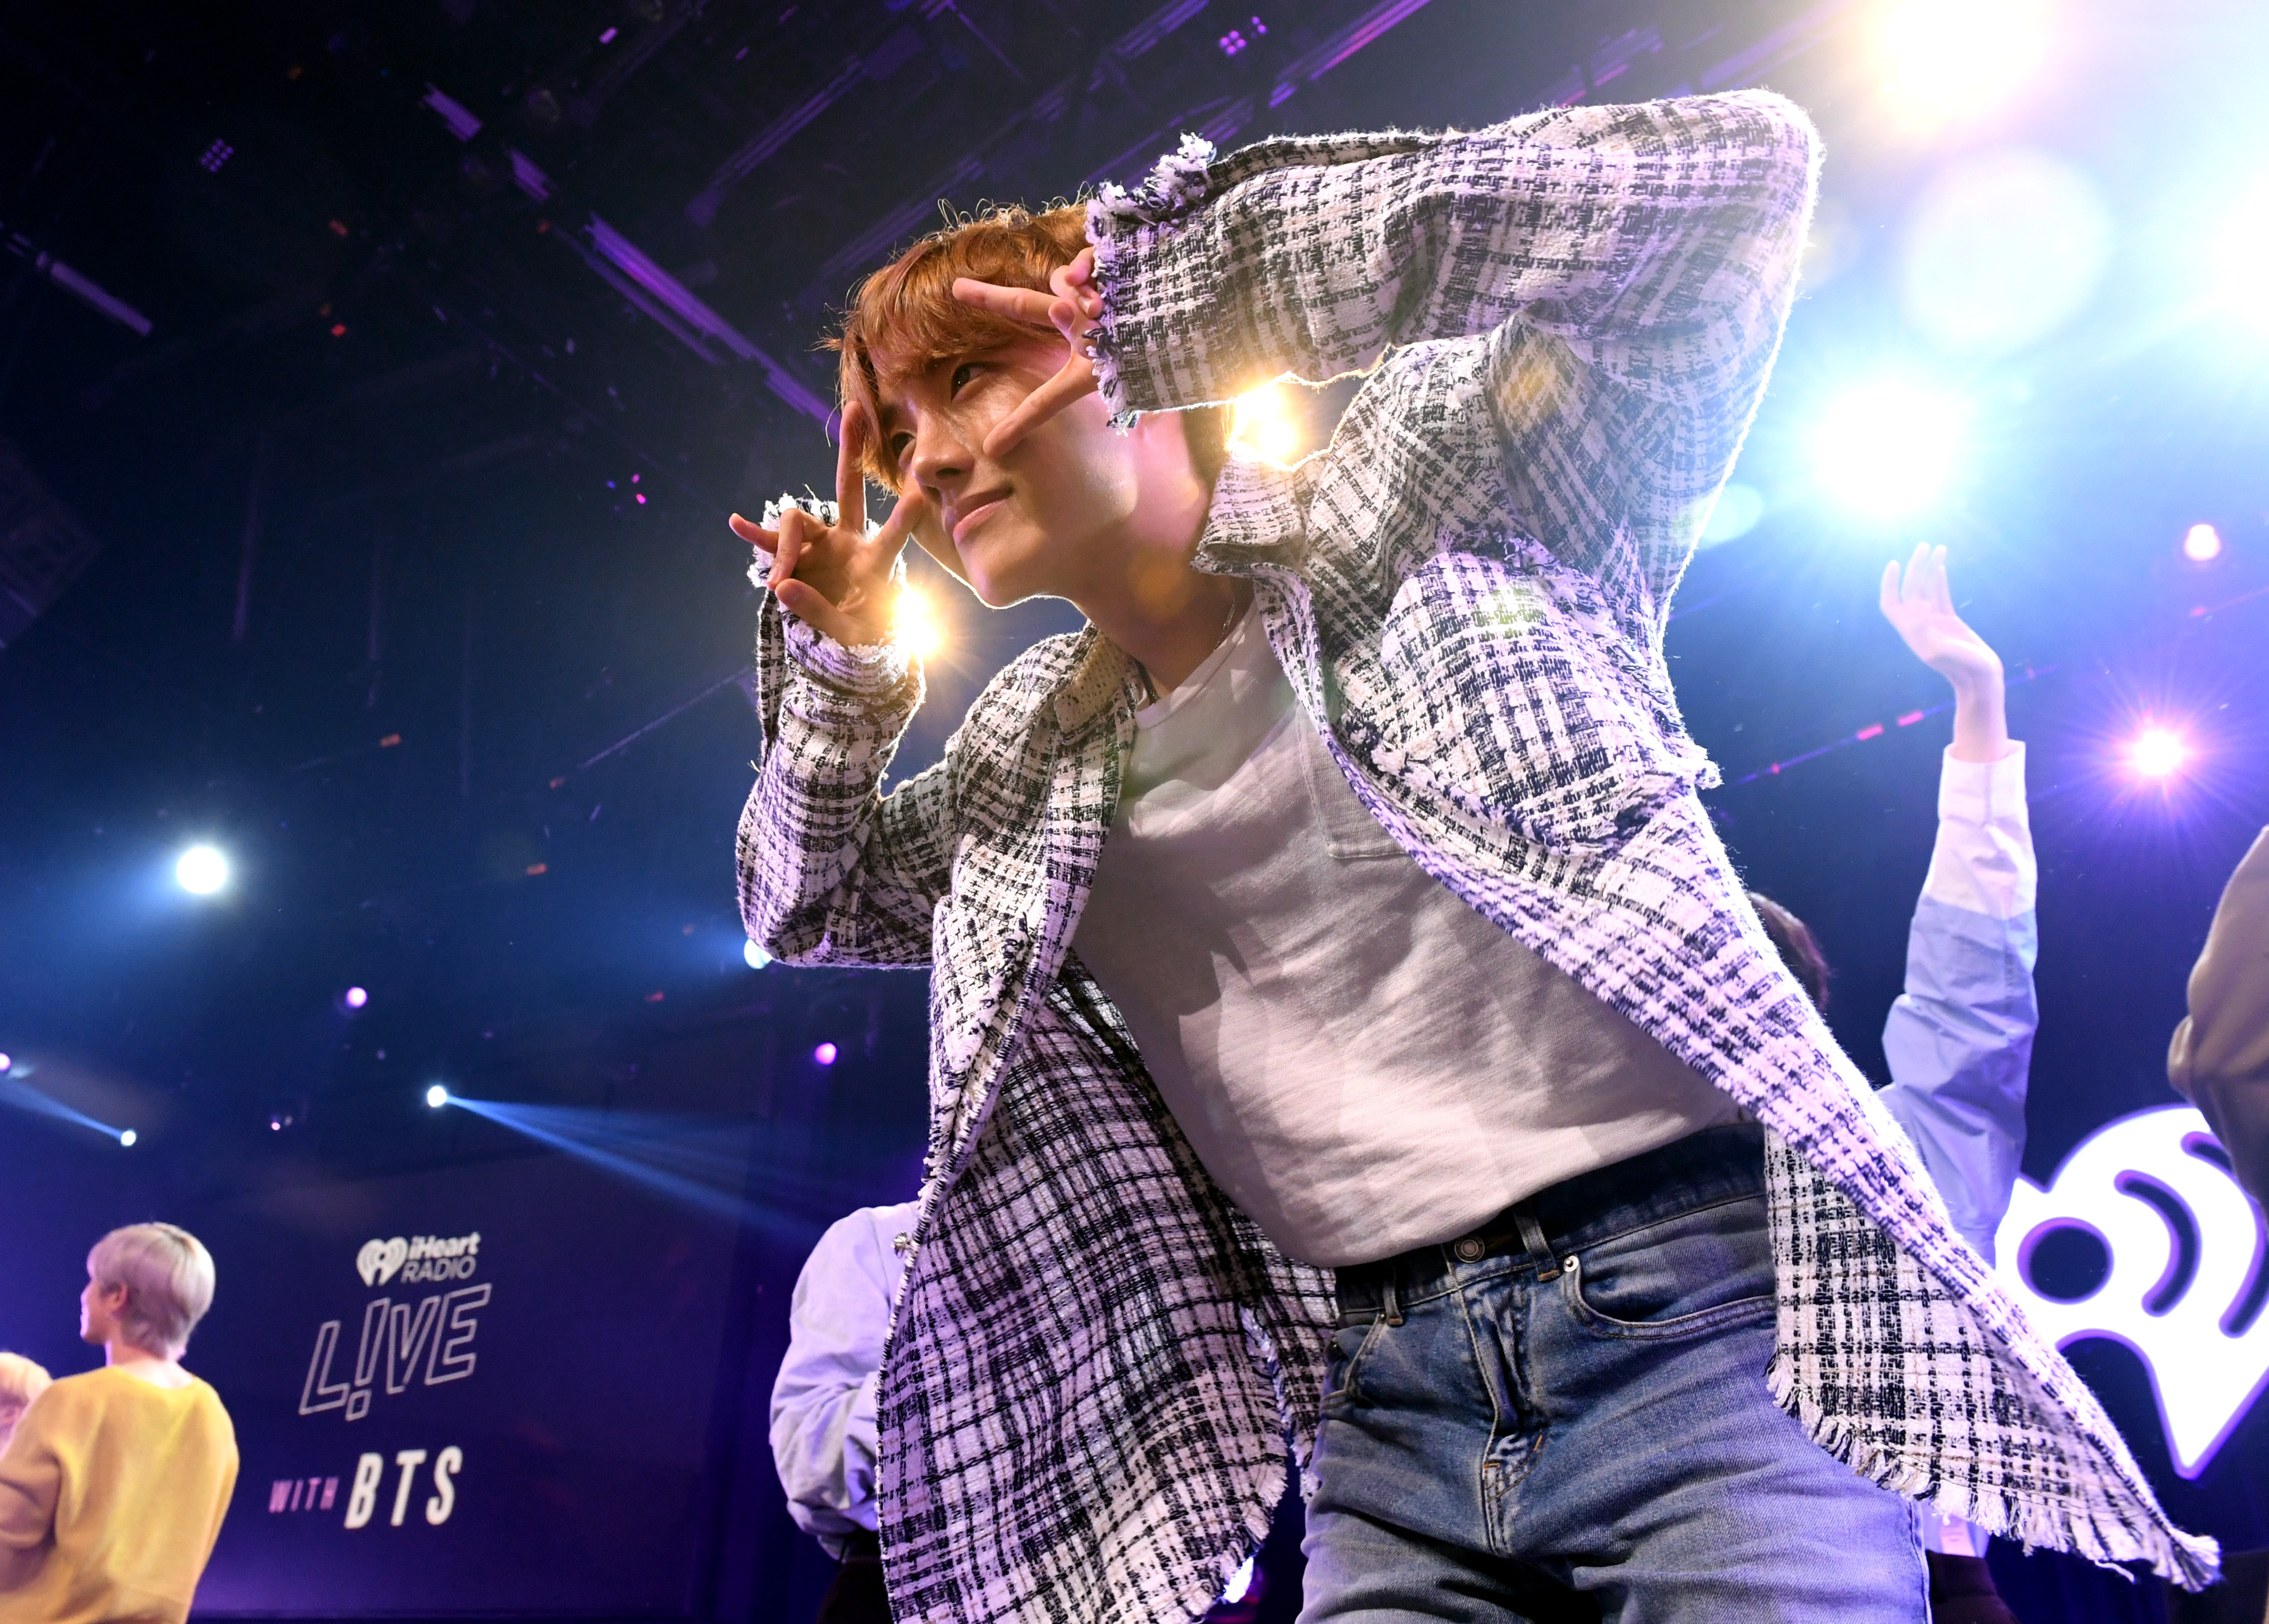 J-Hope of BTS on stage at iHeartRadio LIVE with BTS